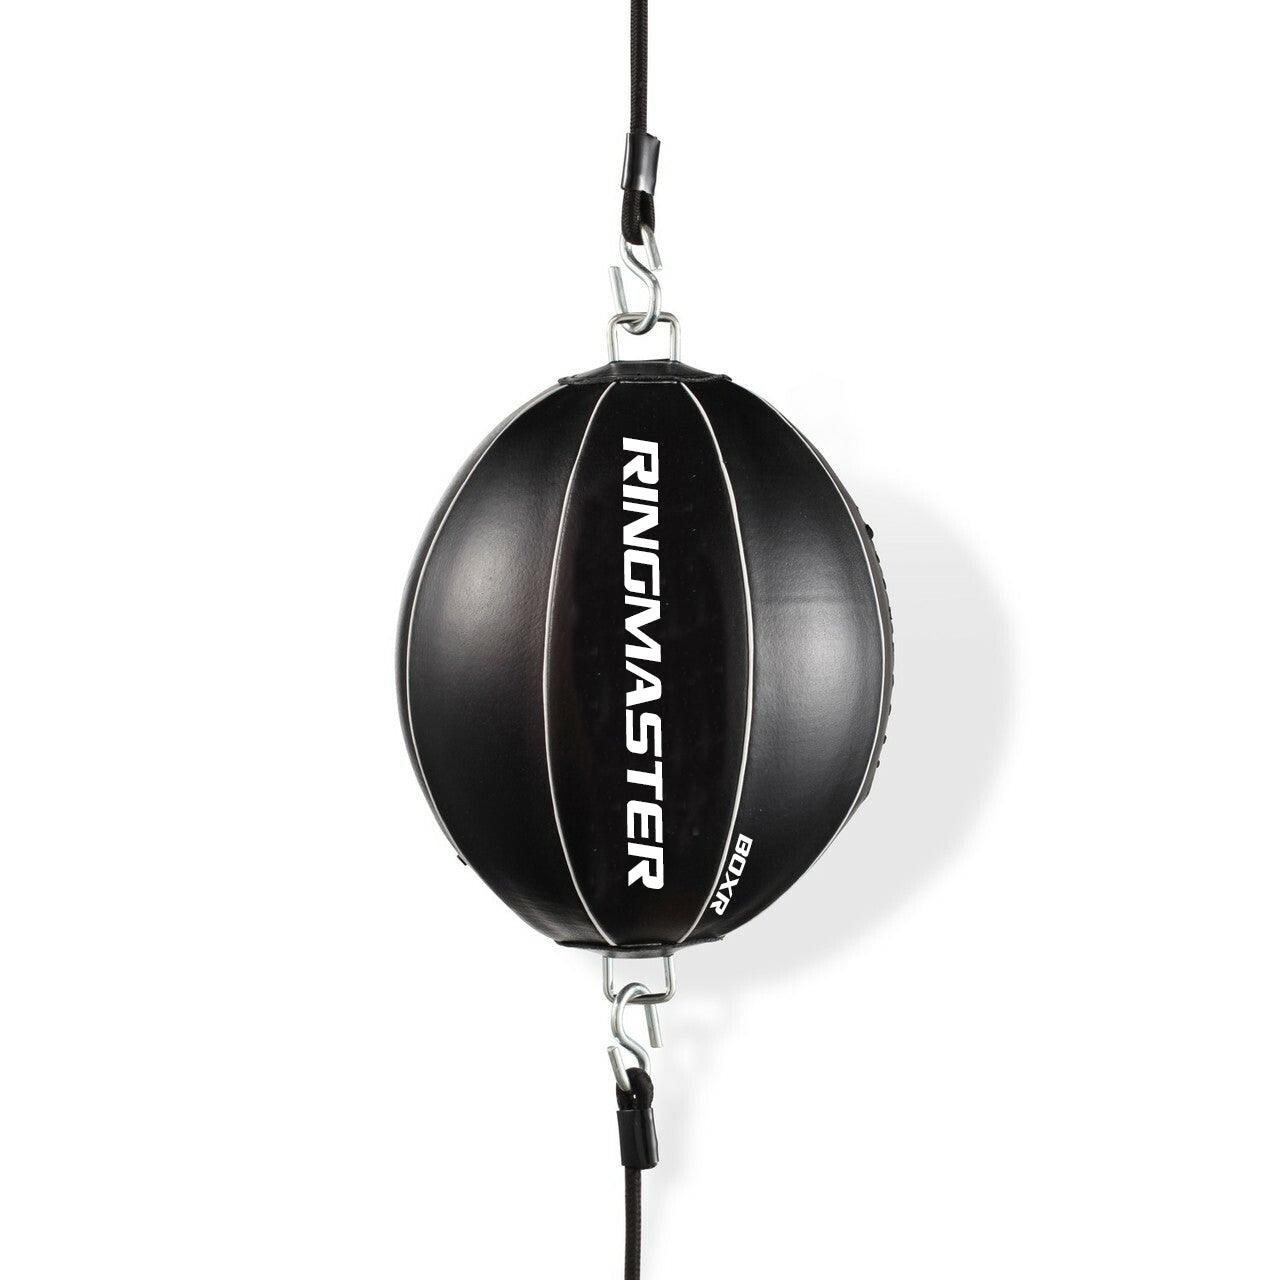 RingMaster Sports Double End Round Speed Ball BoxR Series Synthetic Leather White/Black - RINGMASTER SPORTS - Made For Champions